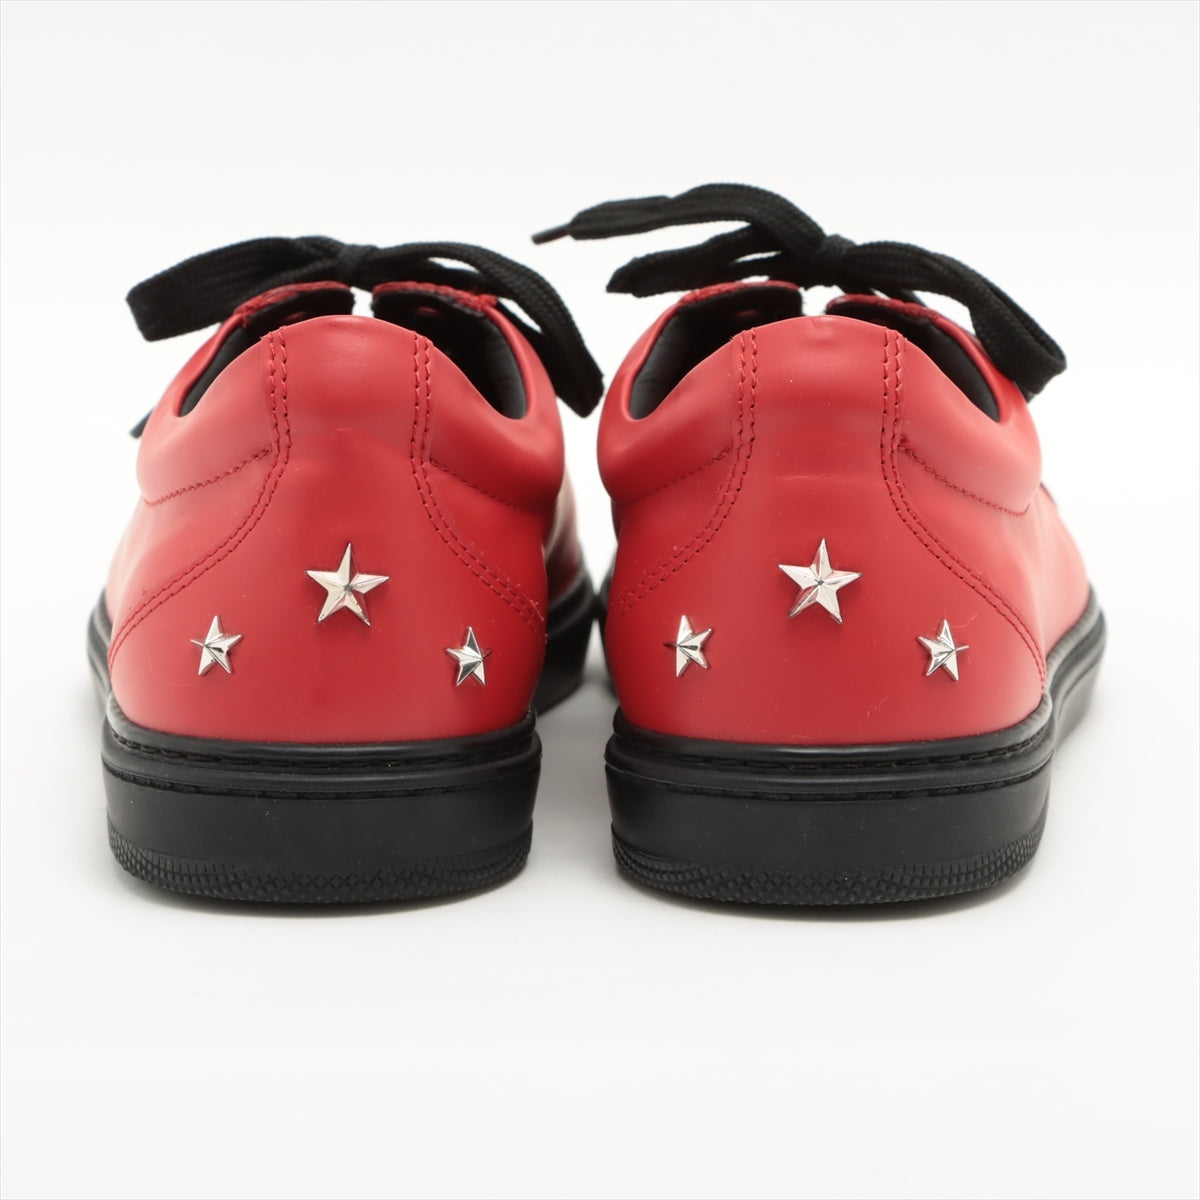 Jimmy Choo Leather Sneakers 43 Men's Red Star studs